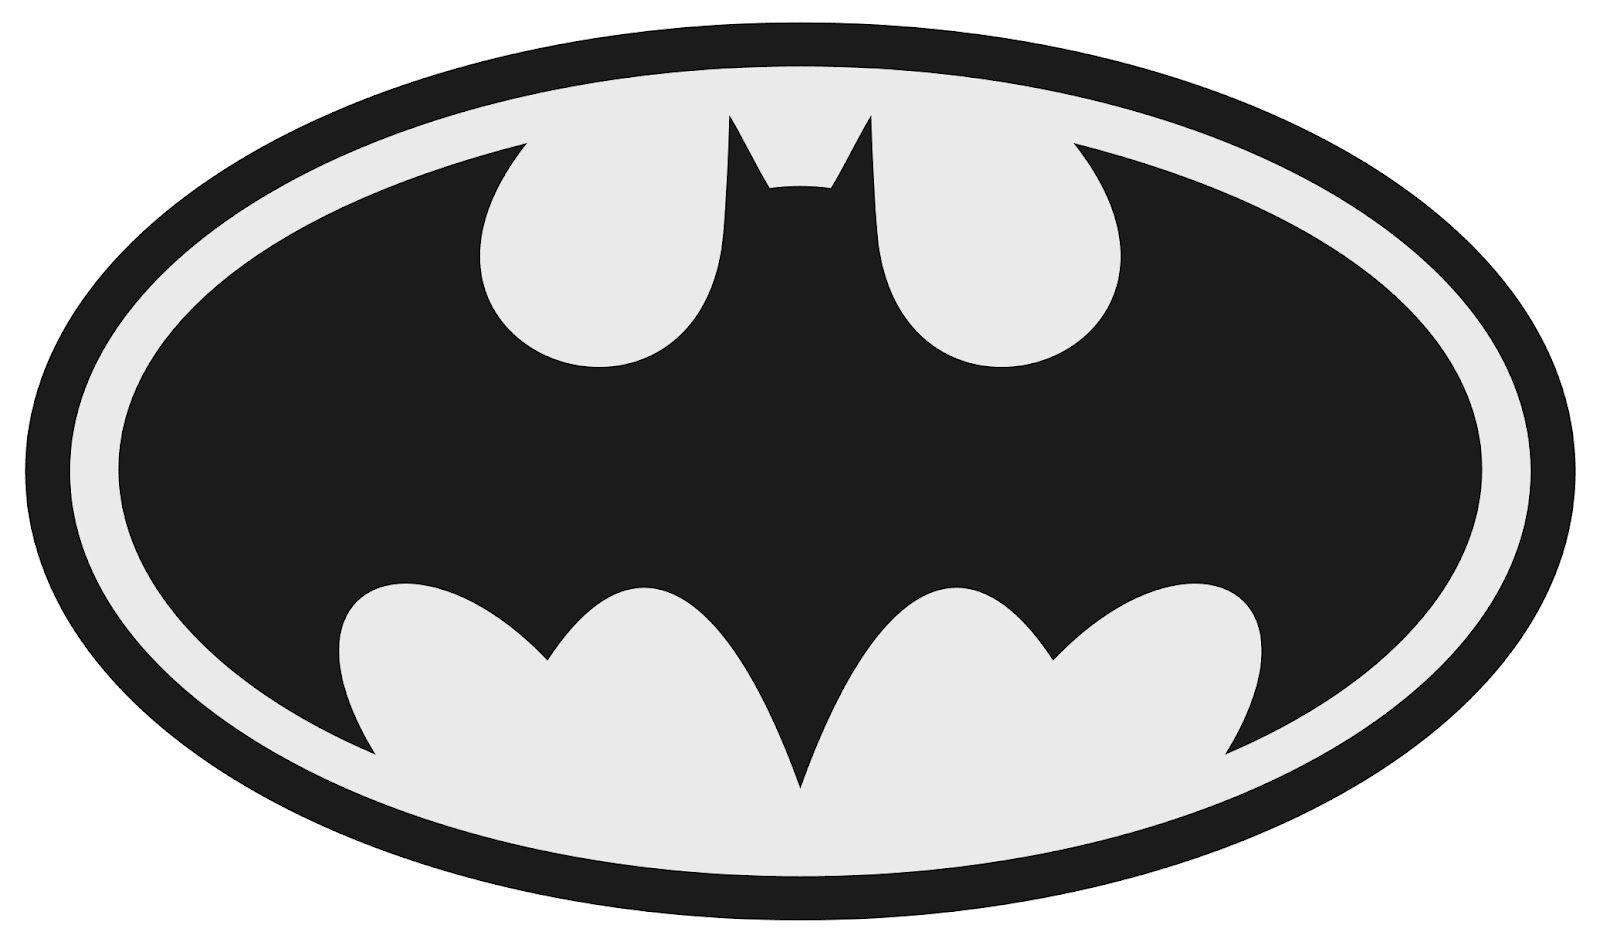 Silhouette at getdrawings com. Batman clipart black and white